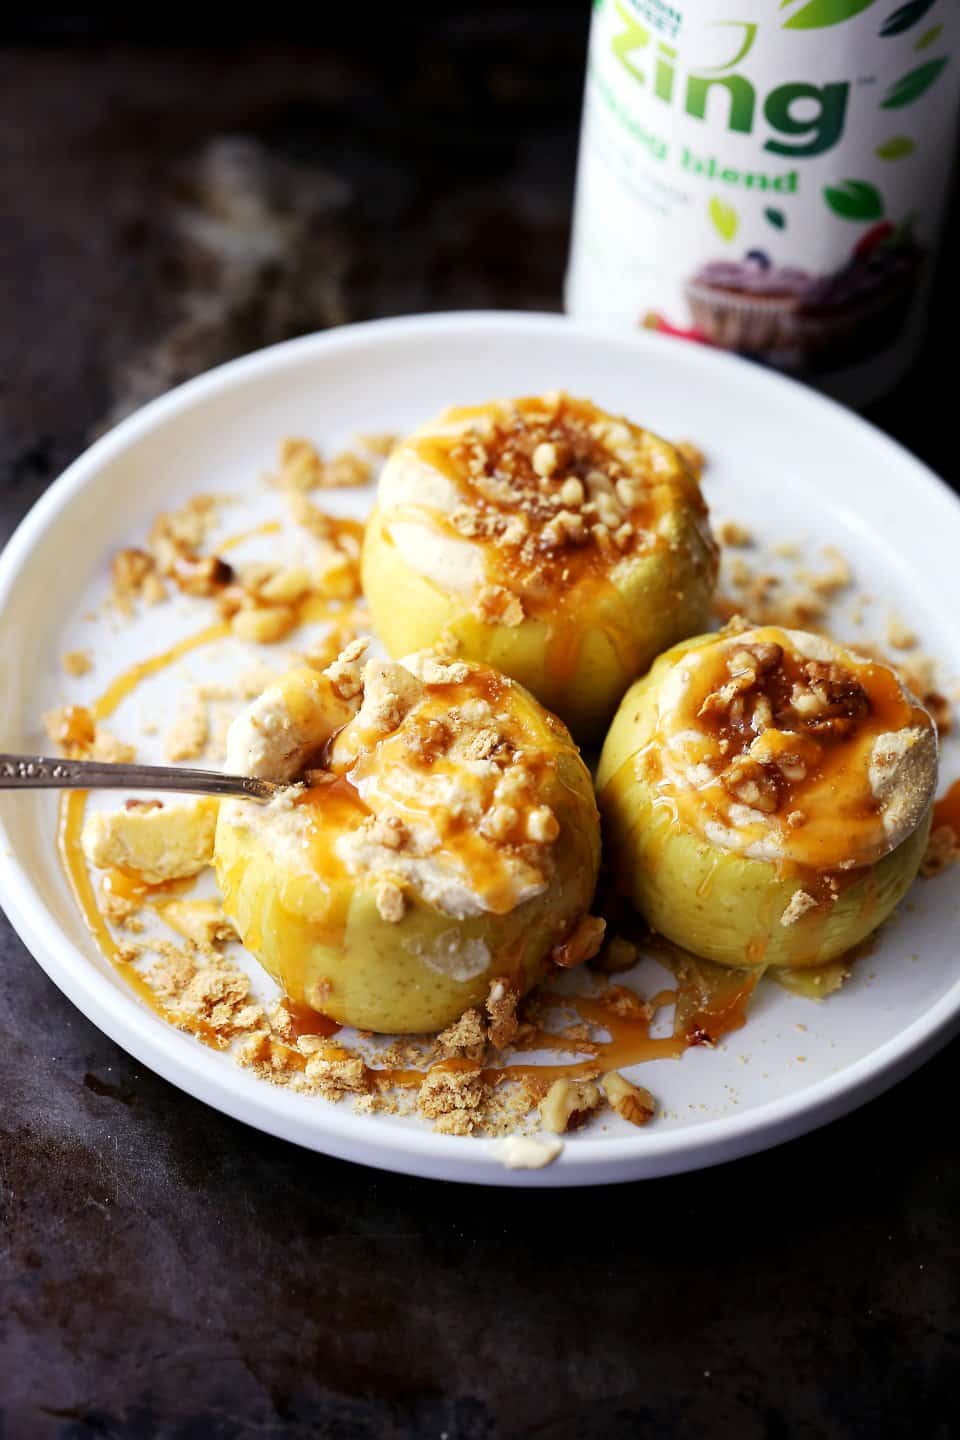 Three cheesecake baked apples with caramel sauce and a can of Zing in the background